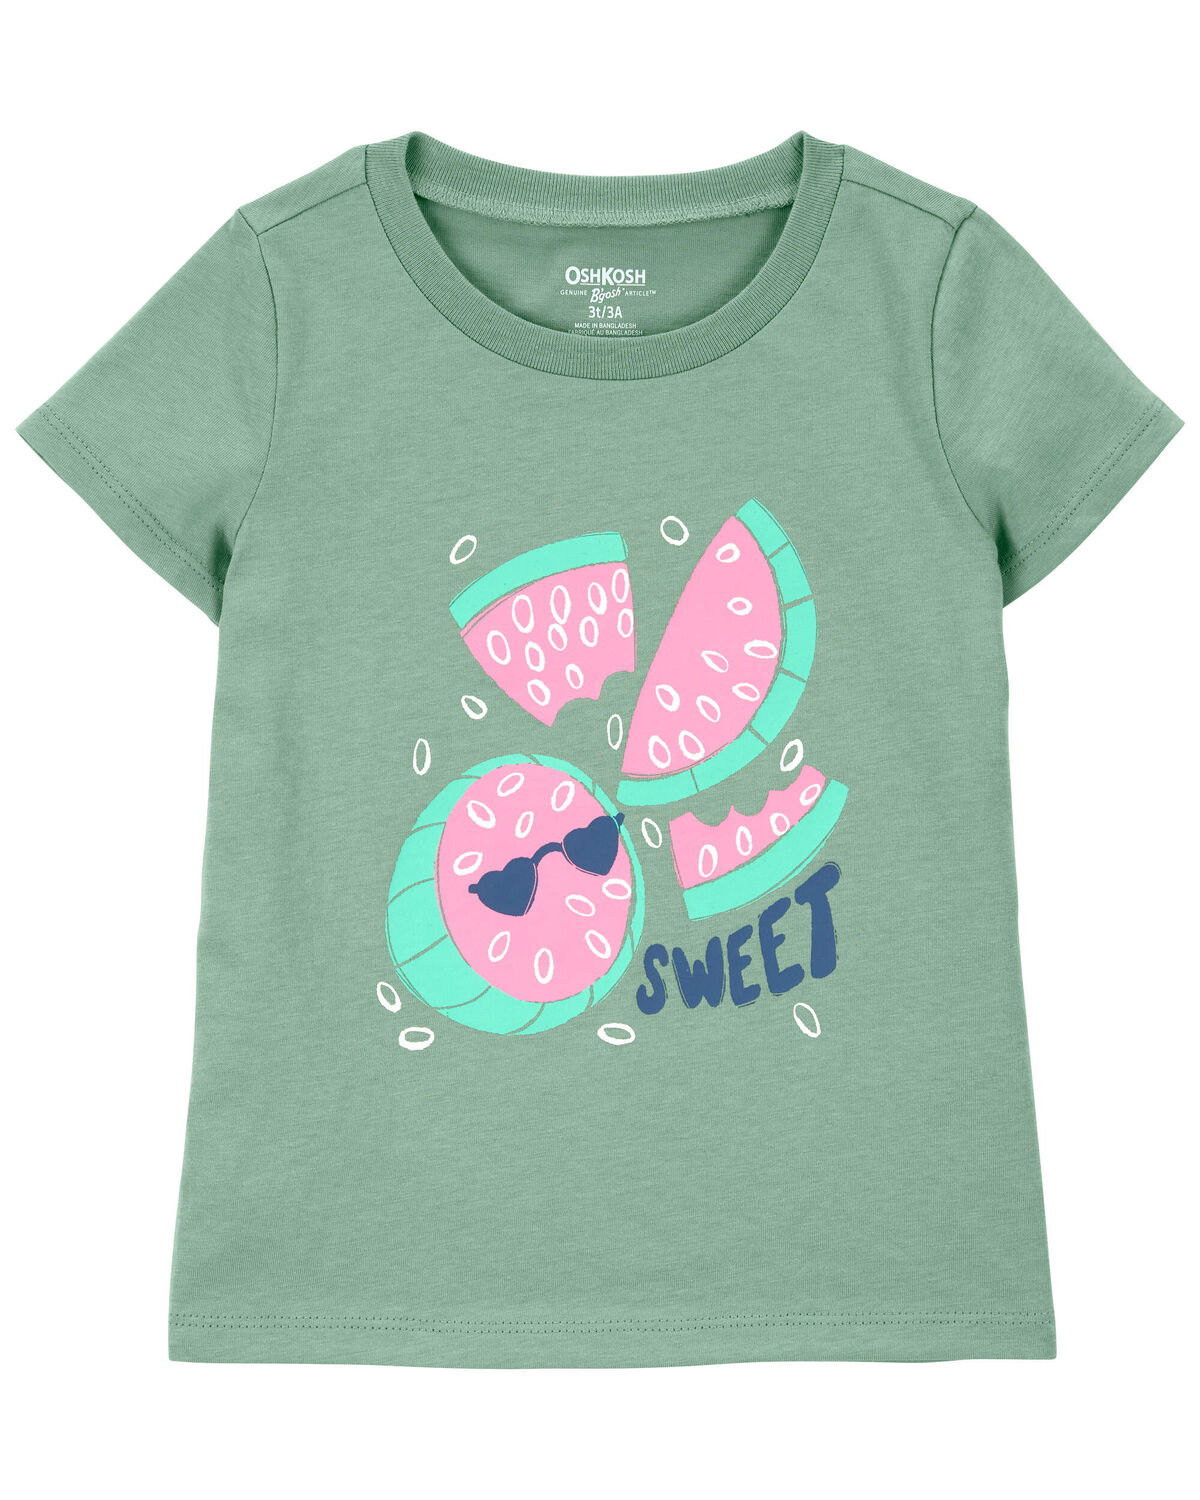 Toddler Watermelon Graphic Tee